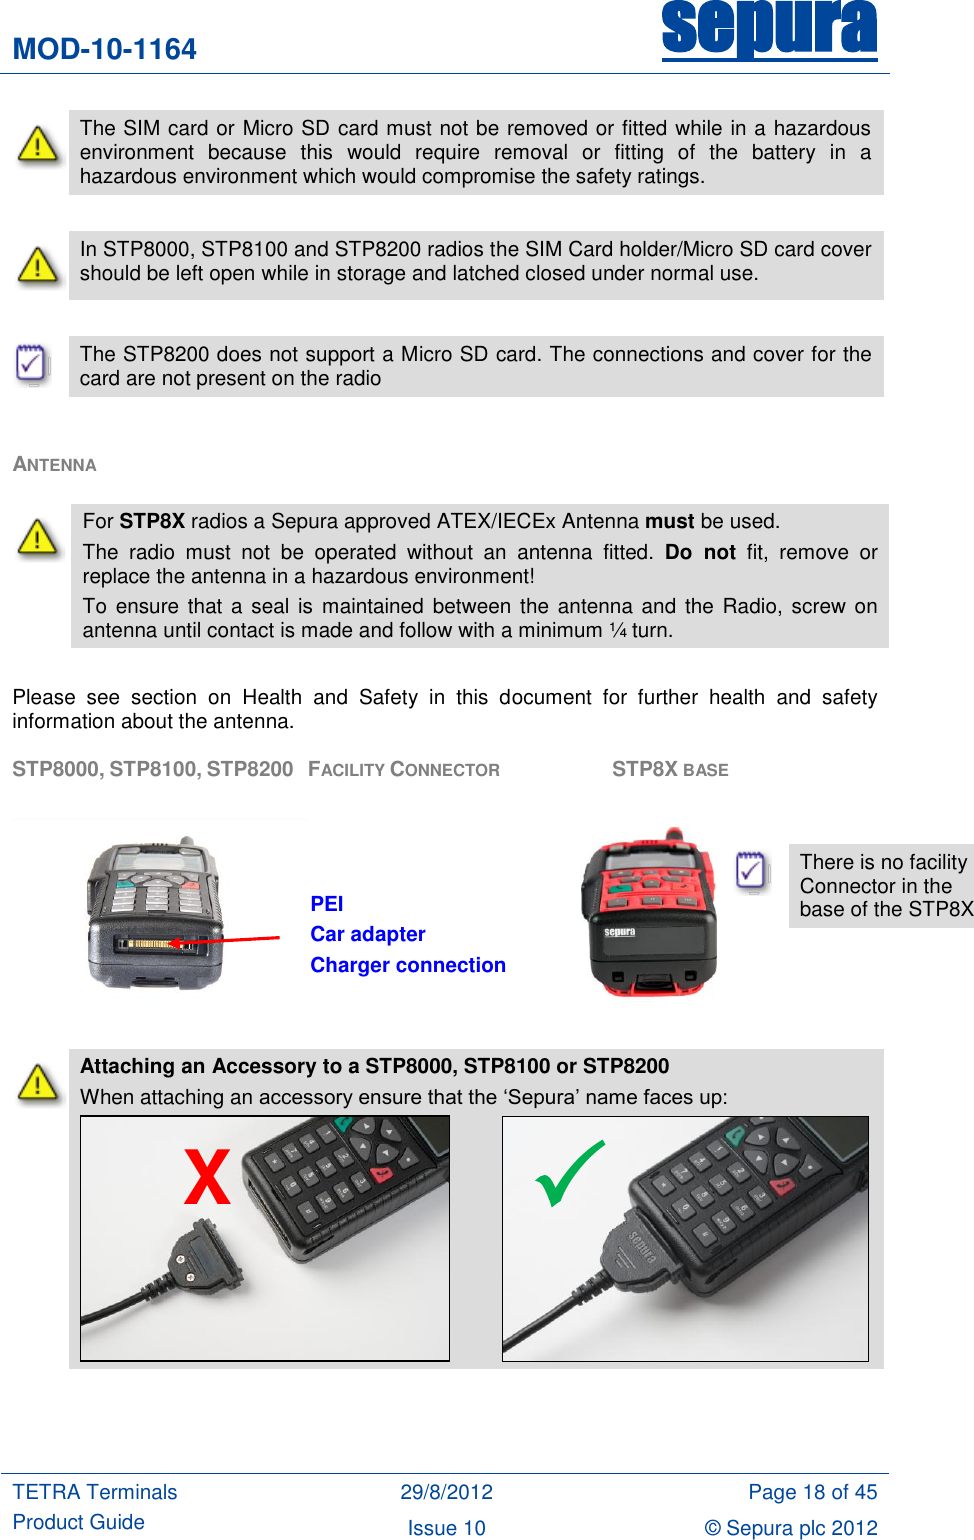 MOD-10-1164 sepura  TETRA Terminals Product Guide 29/8/2012 Page 18 of 45 Issue 10 © Sepura plc 2012    The SIM card or Micro SD card must not be removed or fitted while in a hazardous environment  because  this  would  require  removal  or  fitting  of  the  battery  in  a hazardous environment which would compromise the safety ratings.   In STP8000, STP8100 and STP8200 radios the SIM Card holder/Micro SD card cover should be left open while in storage and latched closed under normal use.   The STP8200 does not support a Micro SD card. The connections and cover for the card are not present on the radio  ANTENNA  Please  see  section  on  Health  and  Safety  in  this  document  for  further  health  and  safety information about the antenna. STP8000, STP8100, STP8200   FACILITY CONNECTOR       STP8X BASE                                                            Attaching an Accessory to a STP8000, STP8100 or STP8200 When attaching an accessory ensure that the „Sepura‟ name faces up:      For STP8X radios a Sepura approved ATEX/IECEx Antenna must be used. The  radio  must  not  be  operated  without  an  antenna  fitted.  Do  not fit,  remove  or replace the antenna in a hazardous environment! To  ensure  that  a  seal  is  maintained  between the antenna and  the  Radio, screw on antenna until contact is made and follow with a minimum ¼ turn. X PEI Car adapter Charger connection   There is no facility Connector in the base of the STP8X  